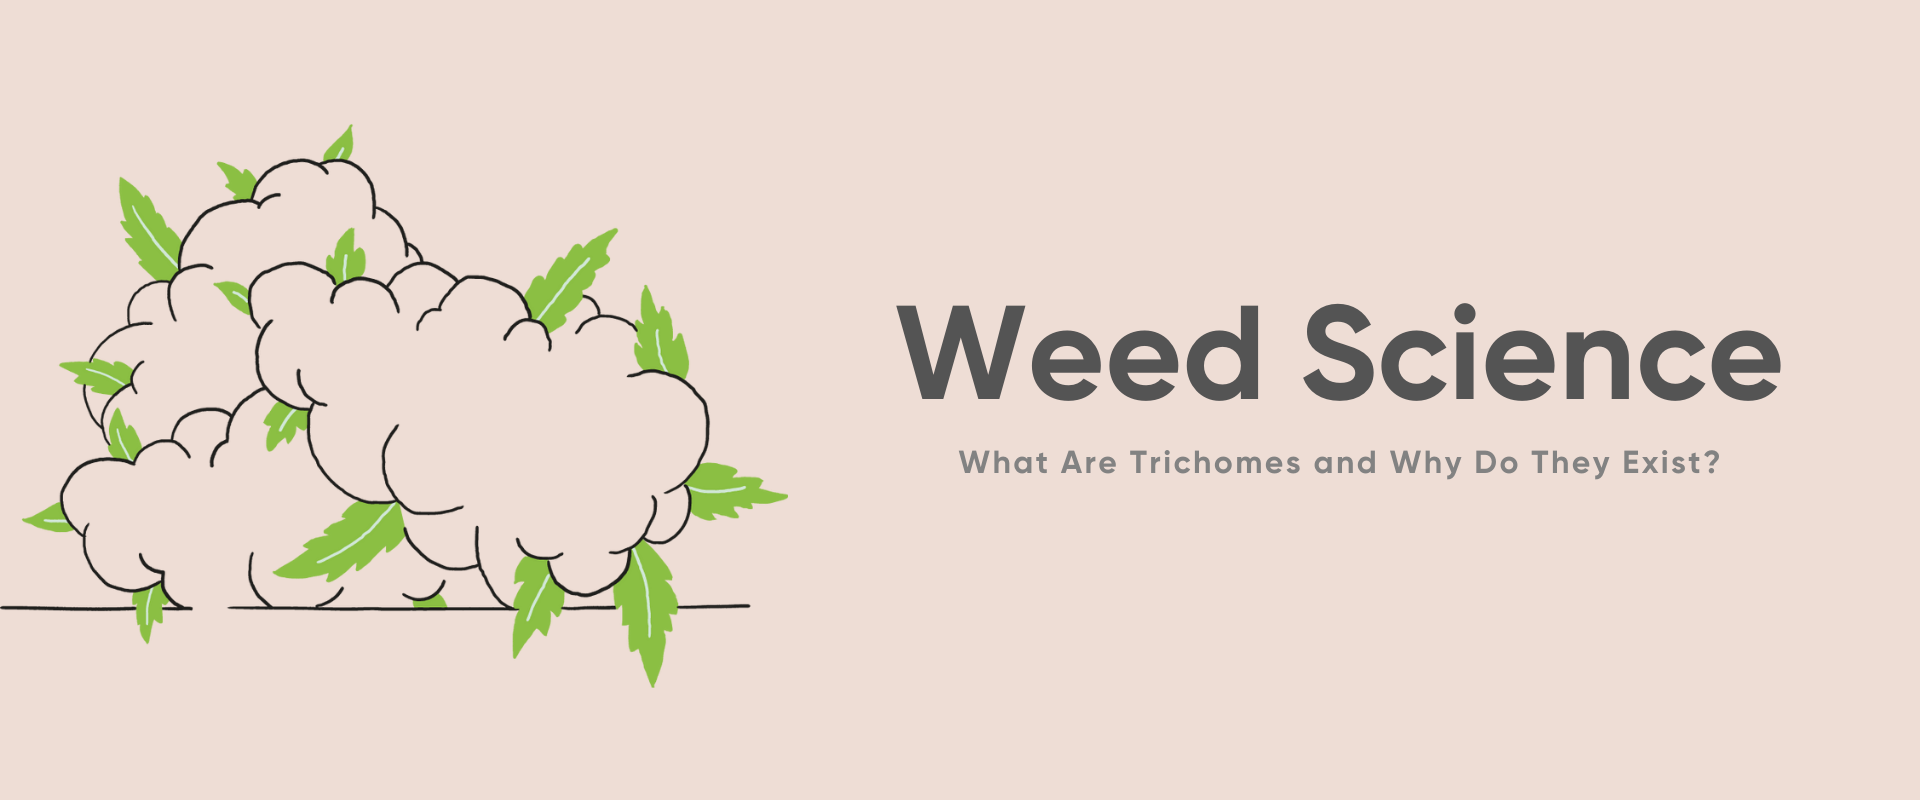 What Are Trichomes and Why Do They Exist?